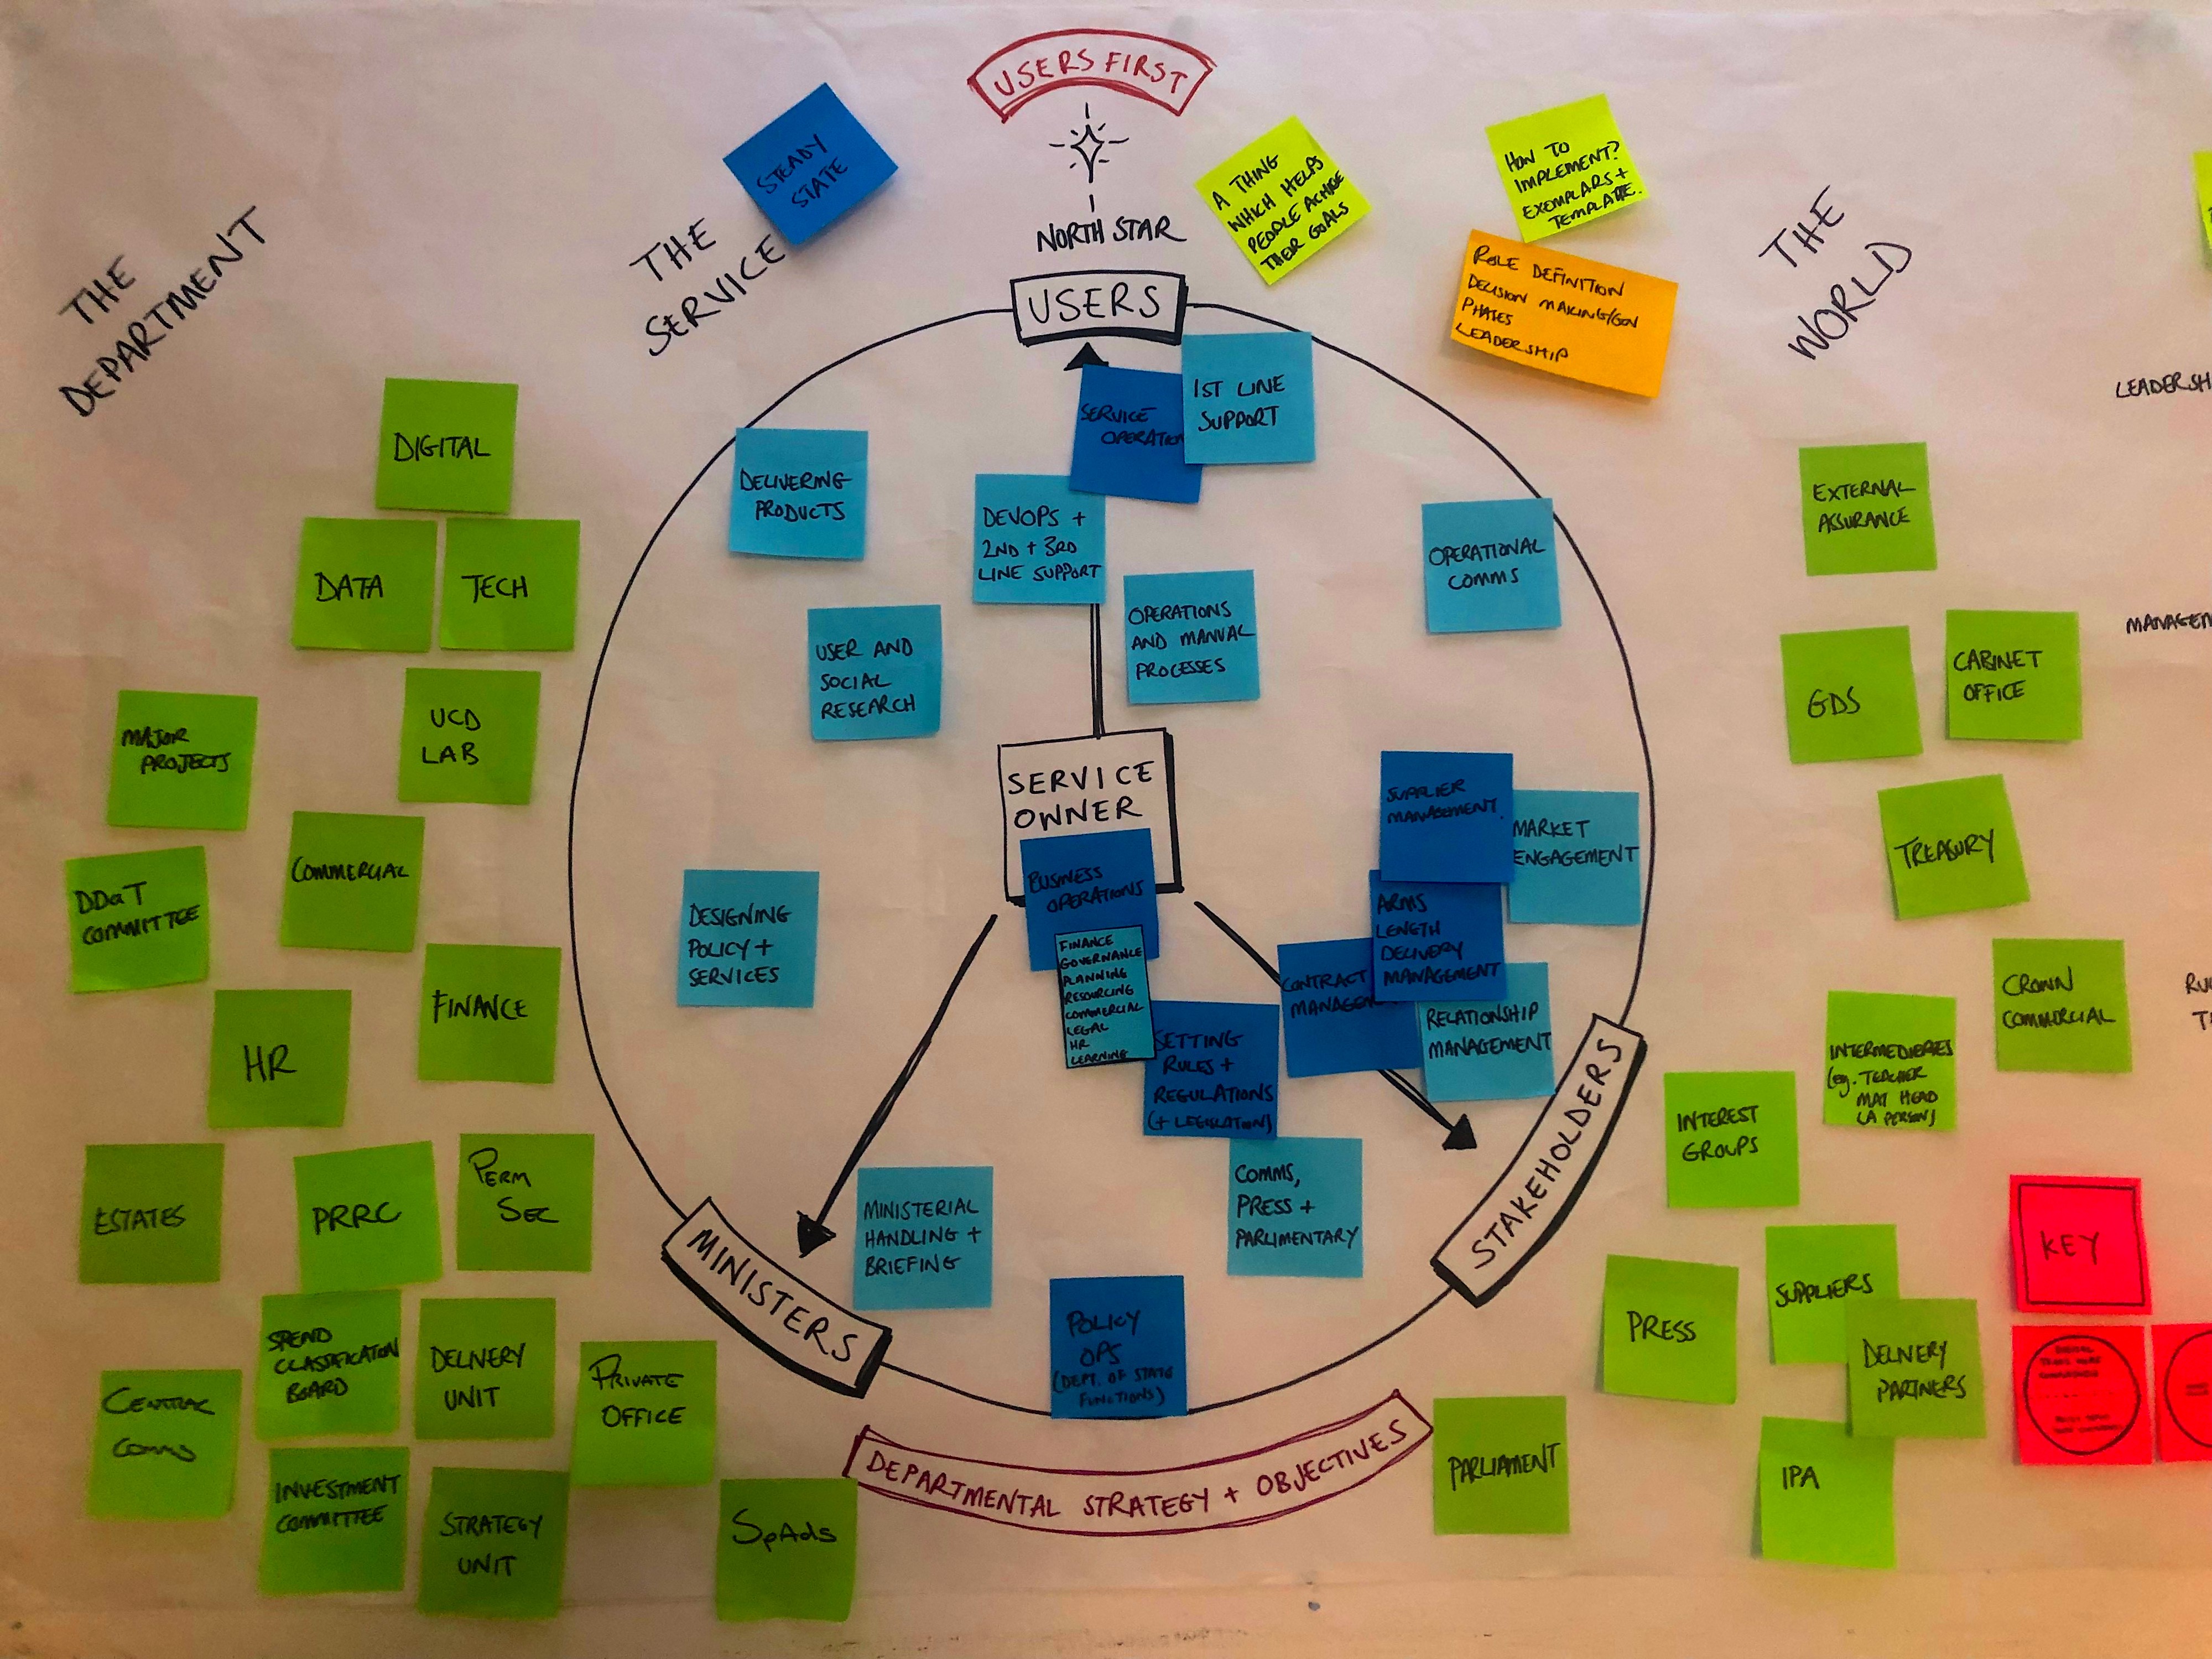 In this photo there is a central circle with lots of postits arranged inside and out. These postits cannot be read clearly but they represent different users of a service and the stakeholders involved in the delivery of that service. There are 2 simplified diagrams that explain this photo. The diagrams have alt text and are further down in this post.